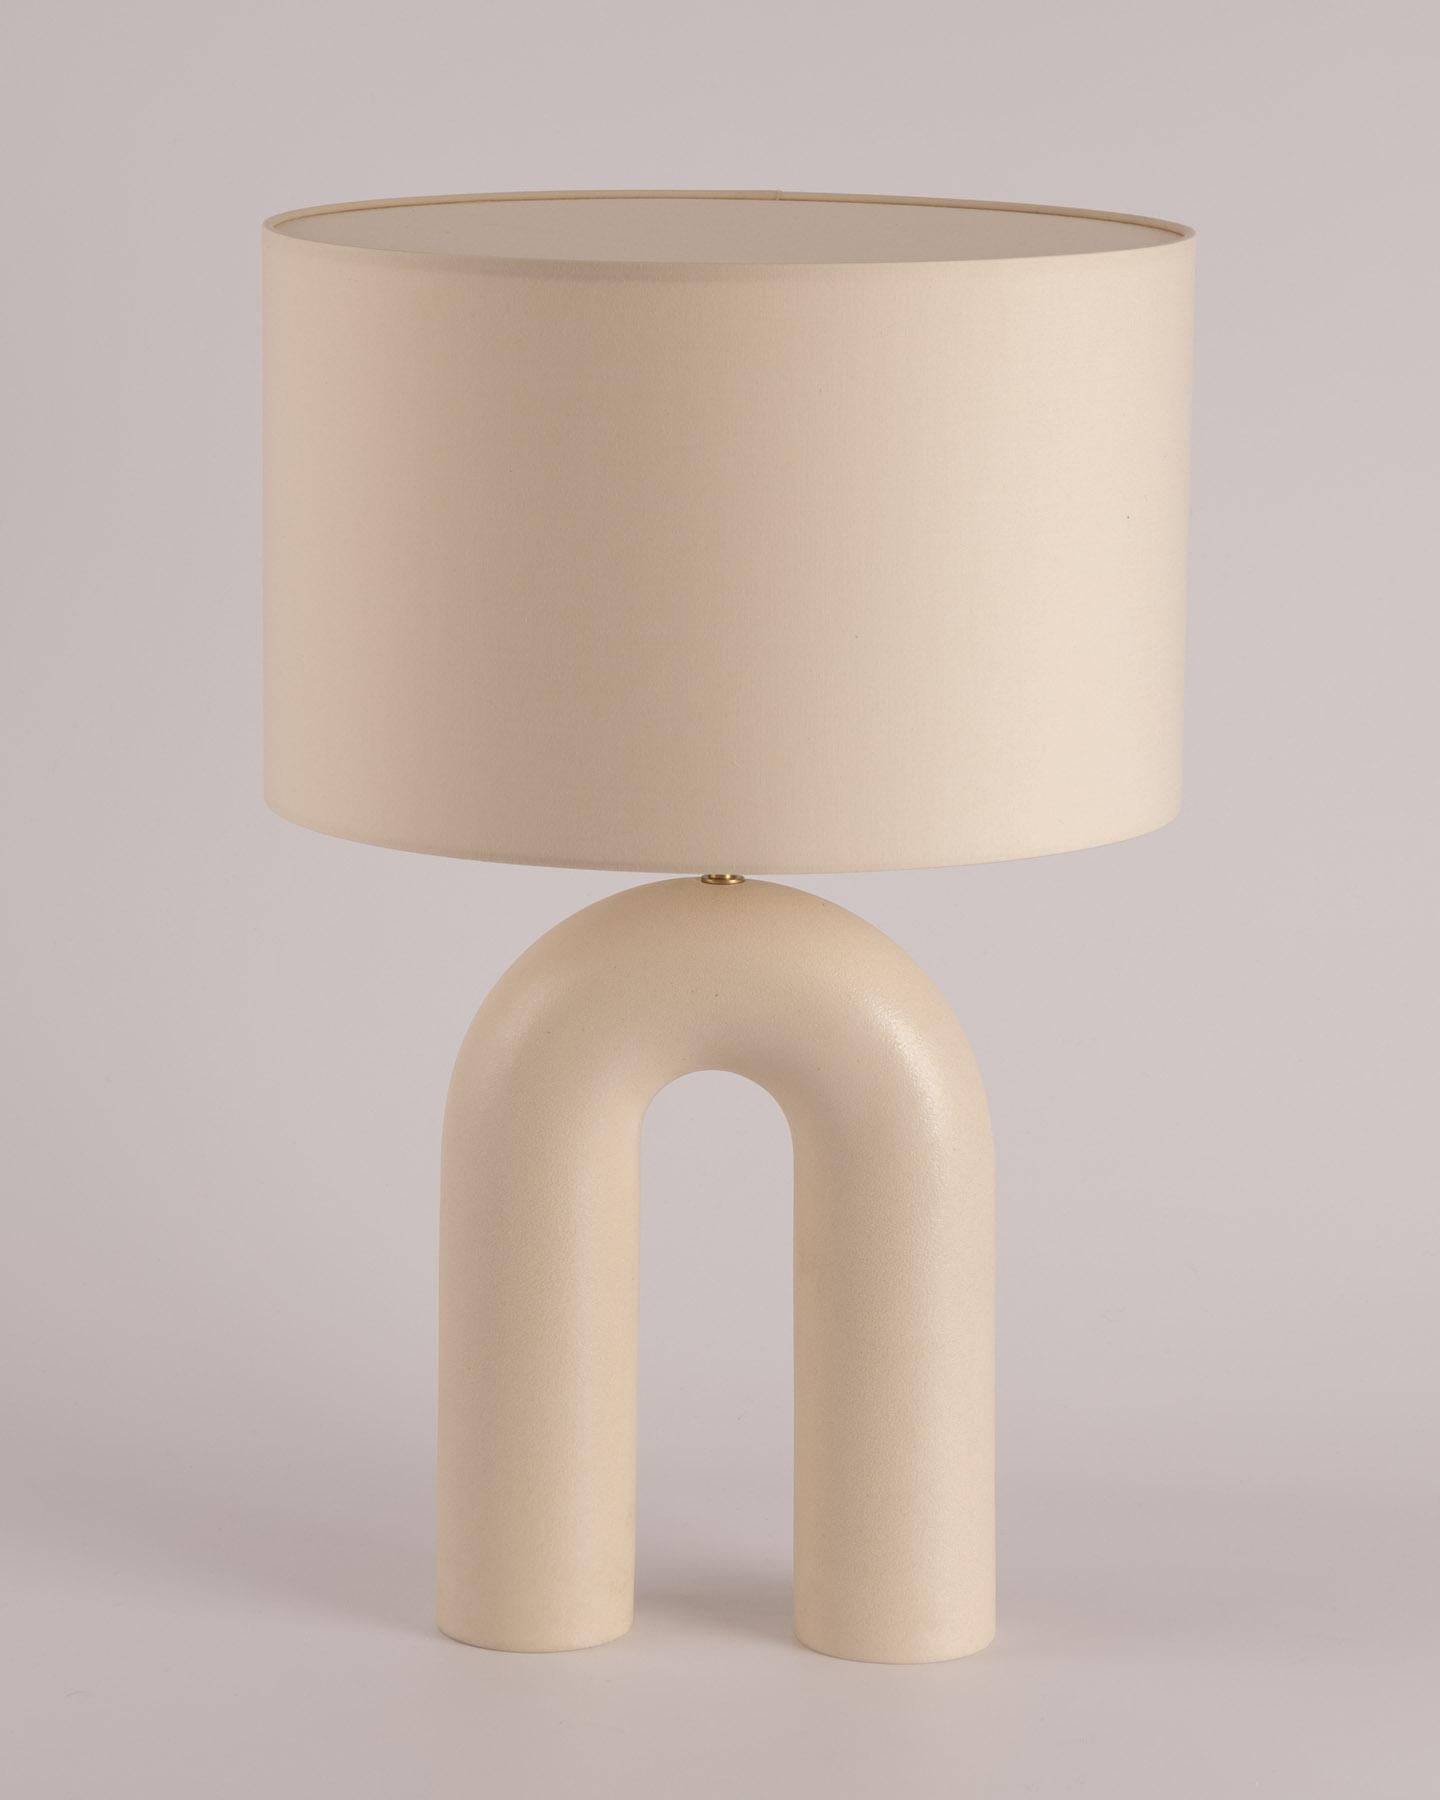 Ecru Ceramic Arko Table Lamp with Beige Lampshade by Simone & Marcel
Dimensions: Ø 40 x H 67 cm.
Materials: Cotton lampshade and ceramic.

Also available in different marbles and ceramics. Custom options available on request. Please contact us.